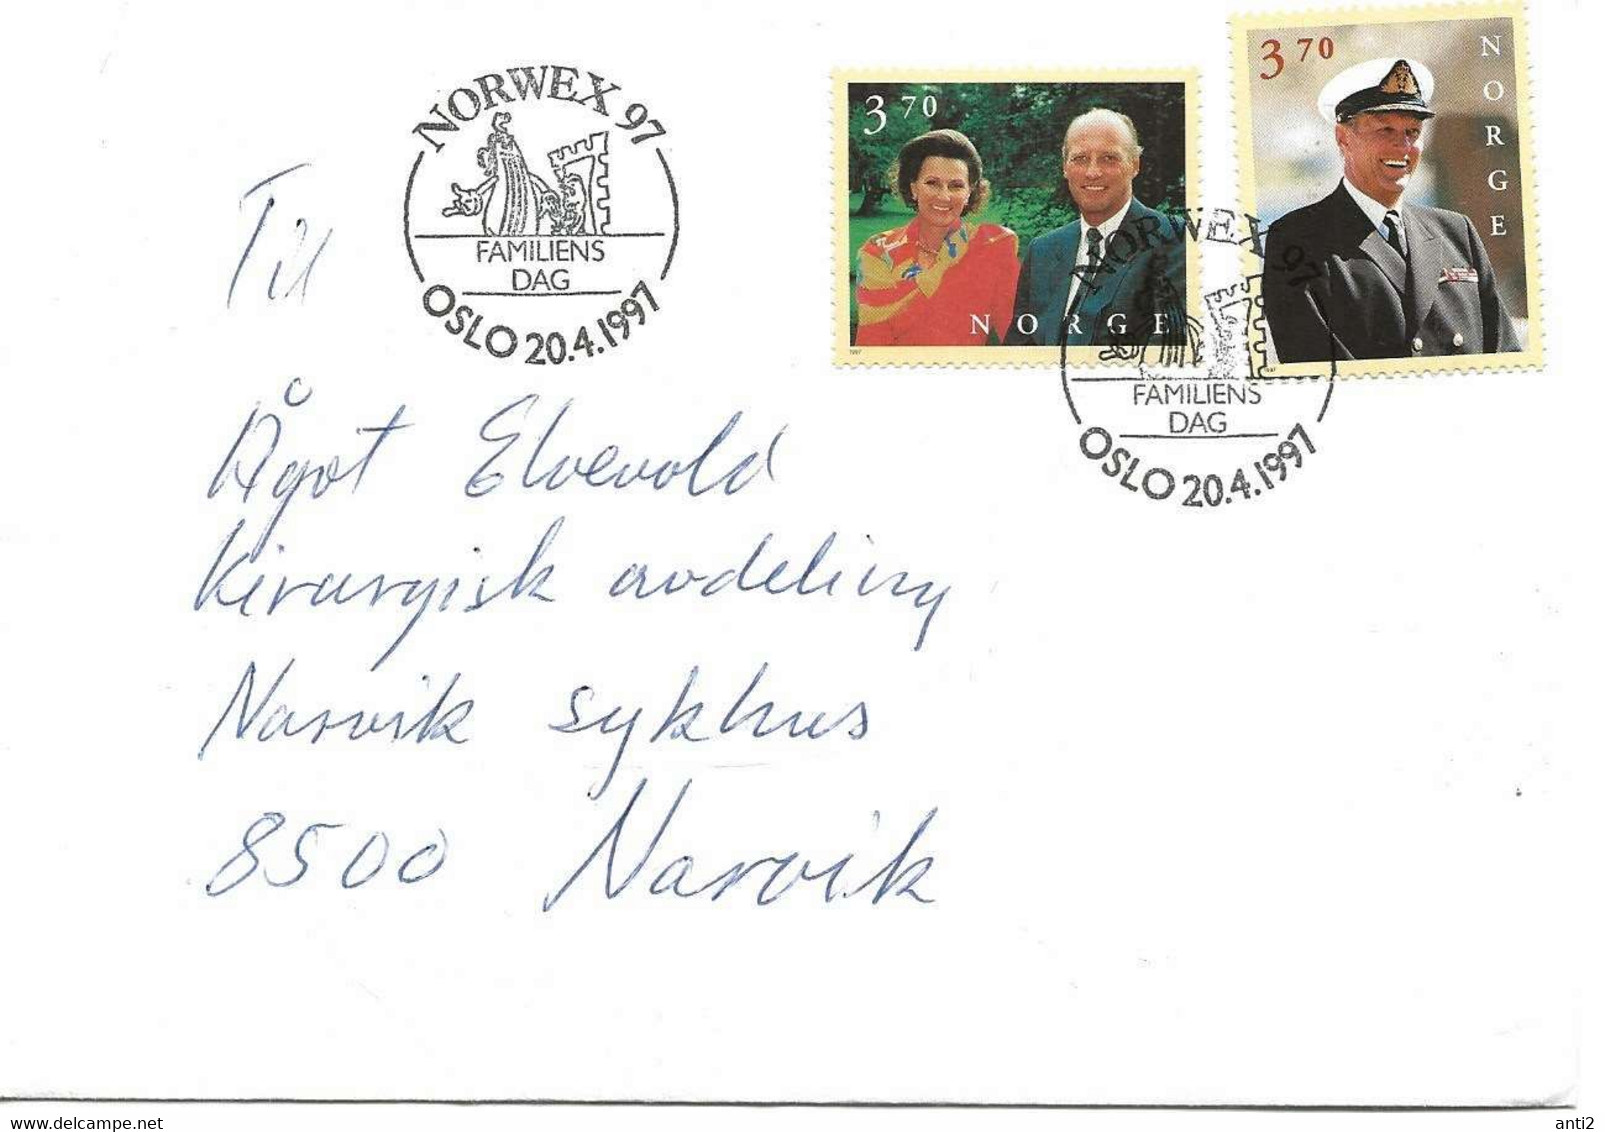 Norway 1997  Cover With Cancelled Norwex 97 - Familys Day, Mi 1244-1245 King And Queen  20.4.97 - Storia Postale